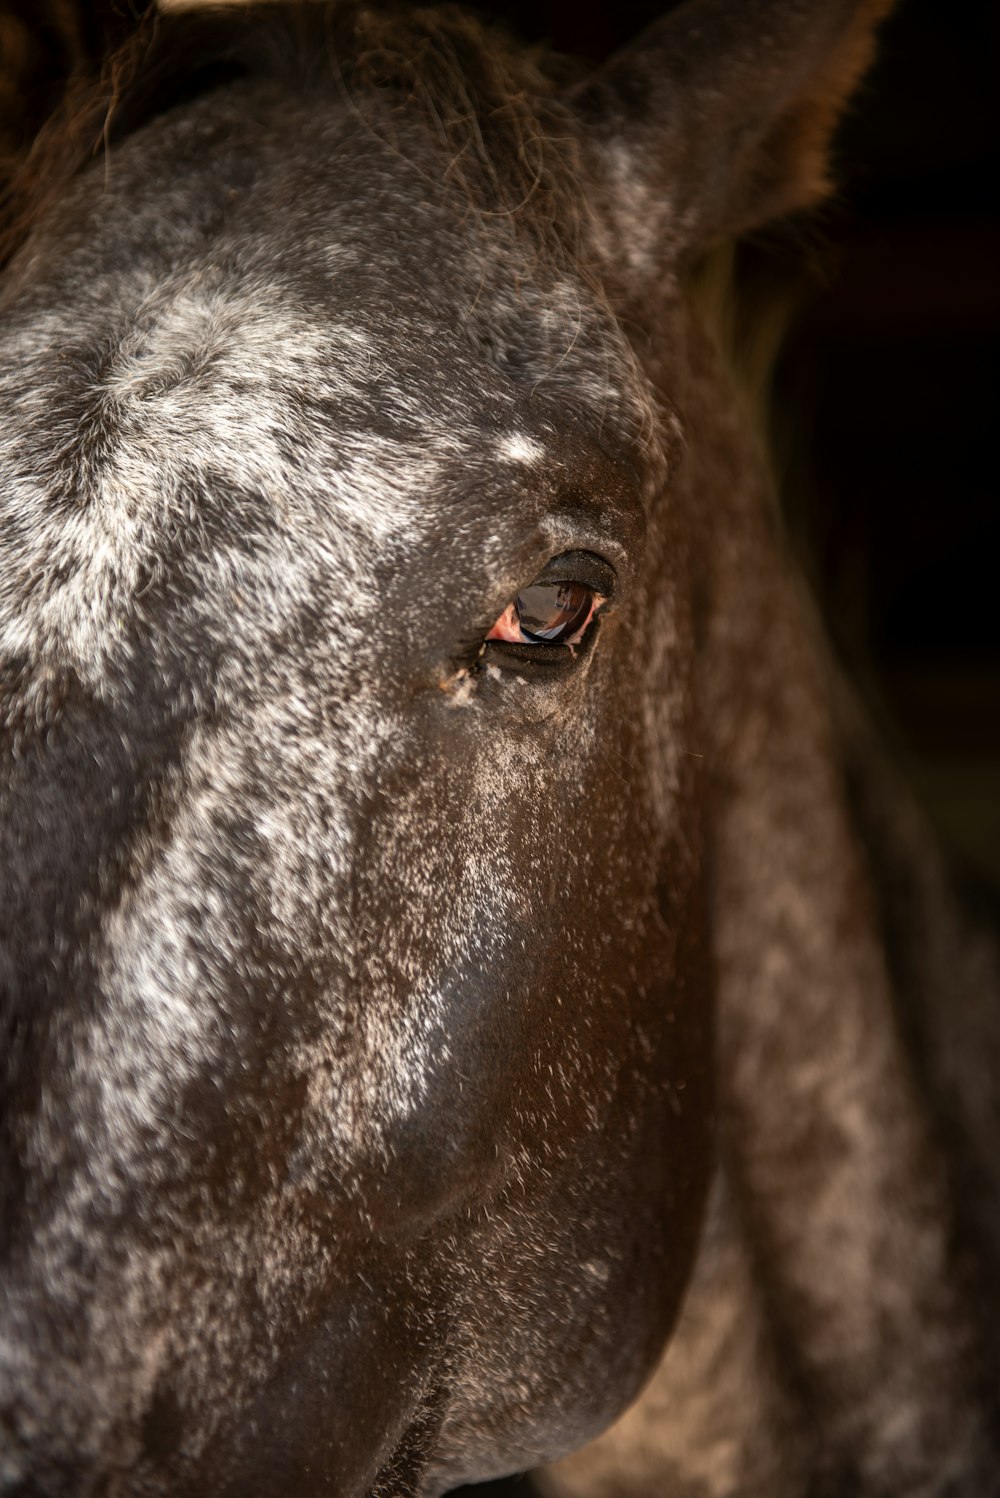 a close up of a horse's face with a blurry background